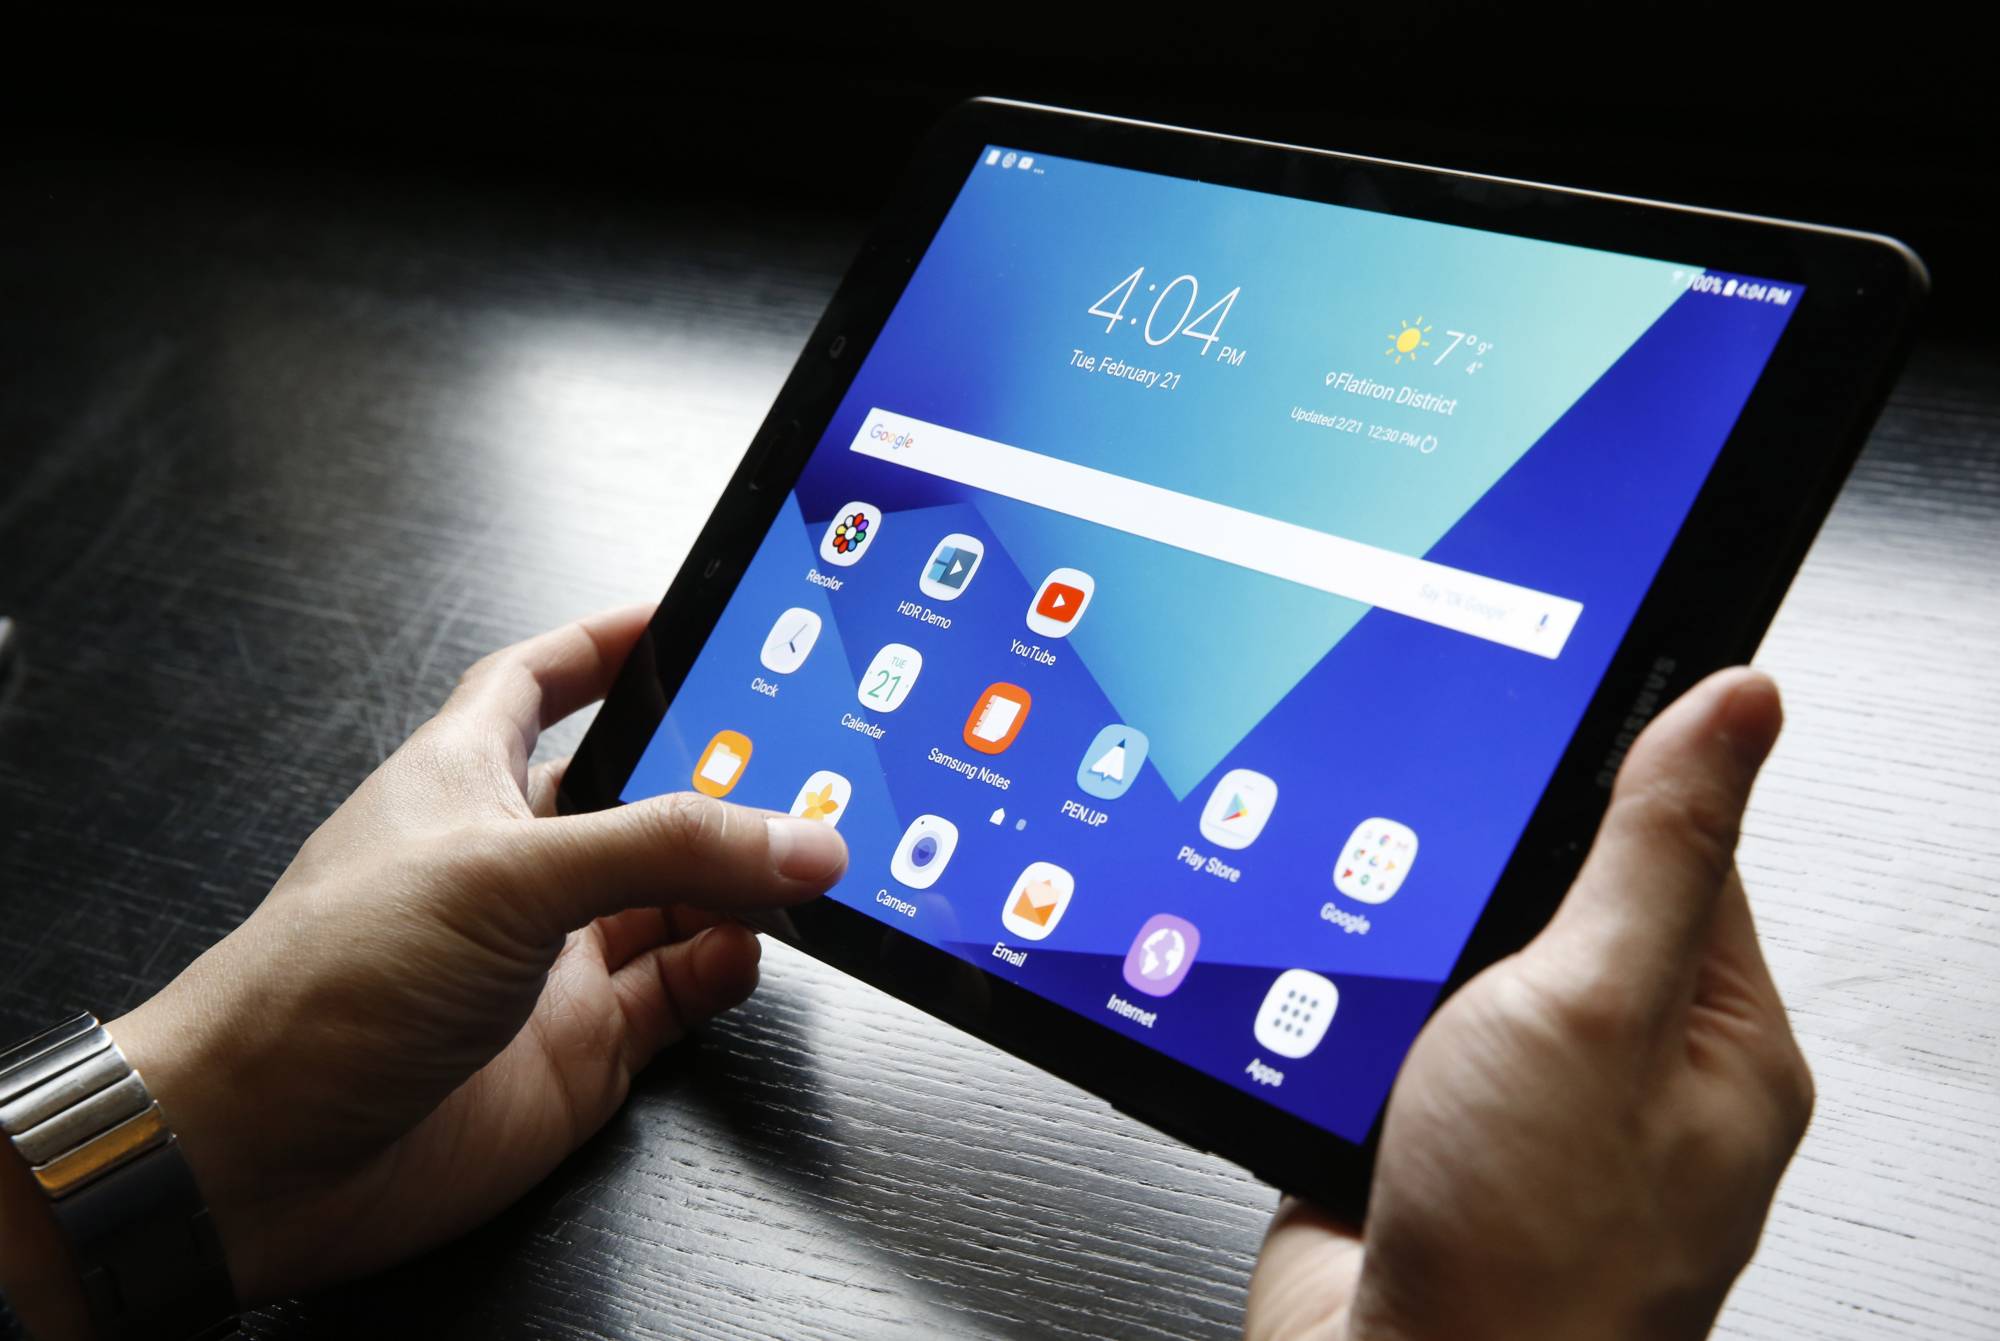 A user holds a Samsung Tab S3 Android tablet, Tuesday, Feb. 21, 2017, during a press briefing in New York. The new tablet will come with many of Samsung's fire-prone Note 7's features, including an S Pen stylus and a richly colored screen. (AP Photo/Kathy Willens)